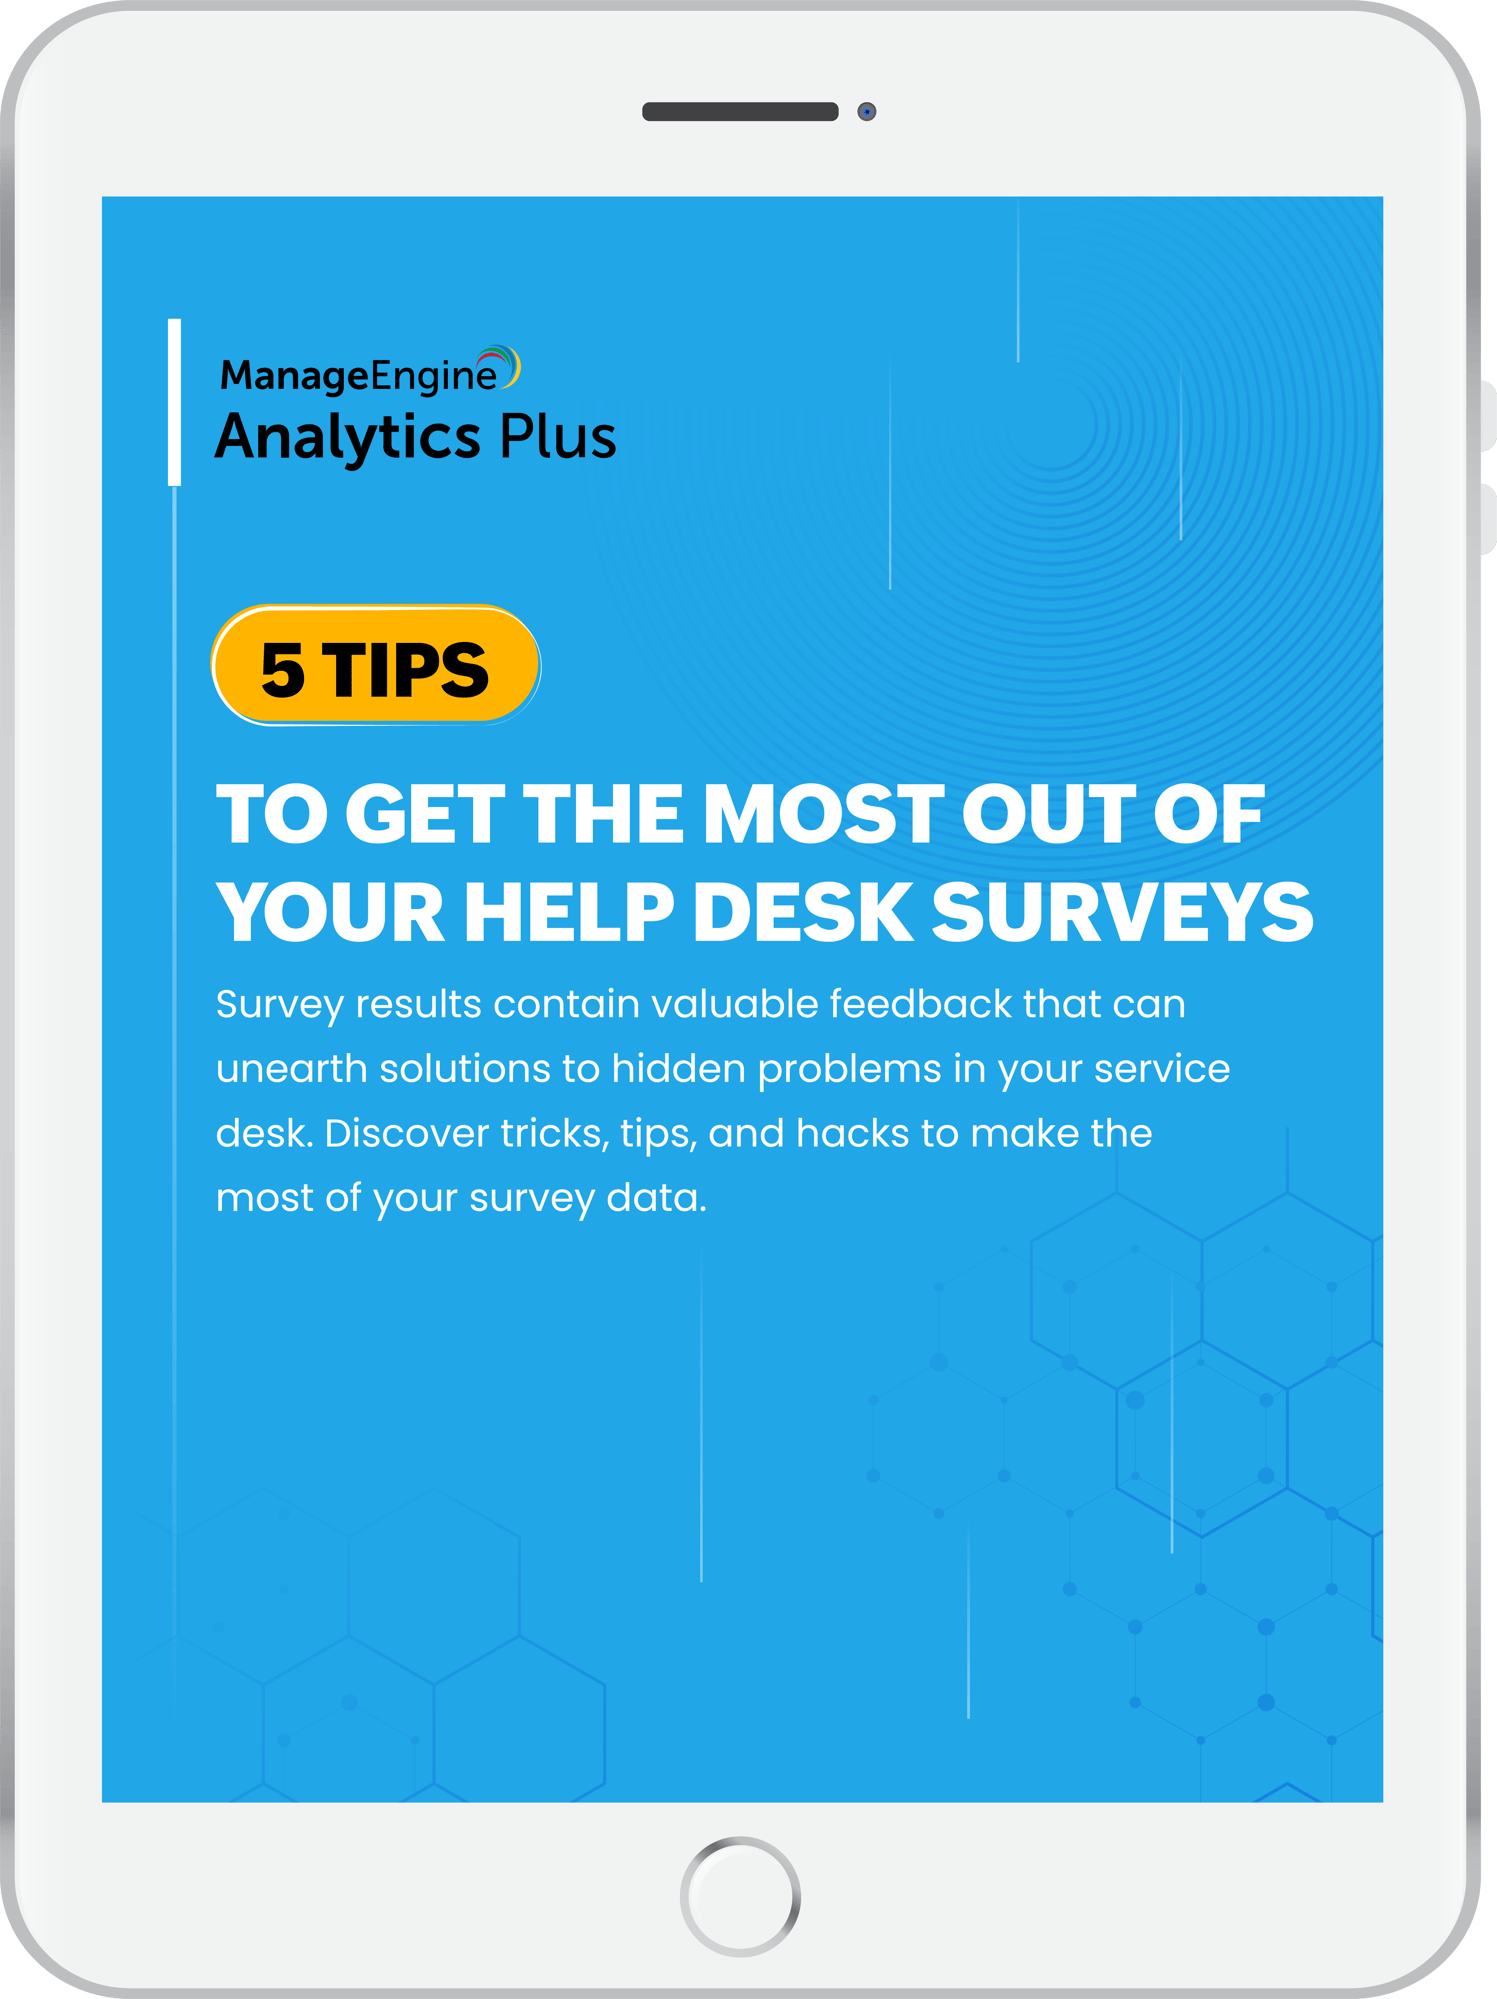 5 tips to get the most out of your help desk surveys